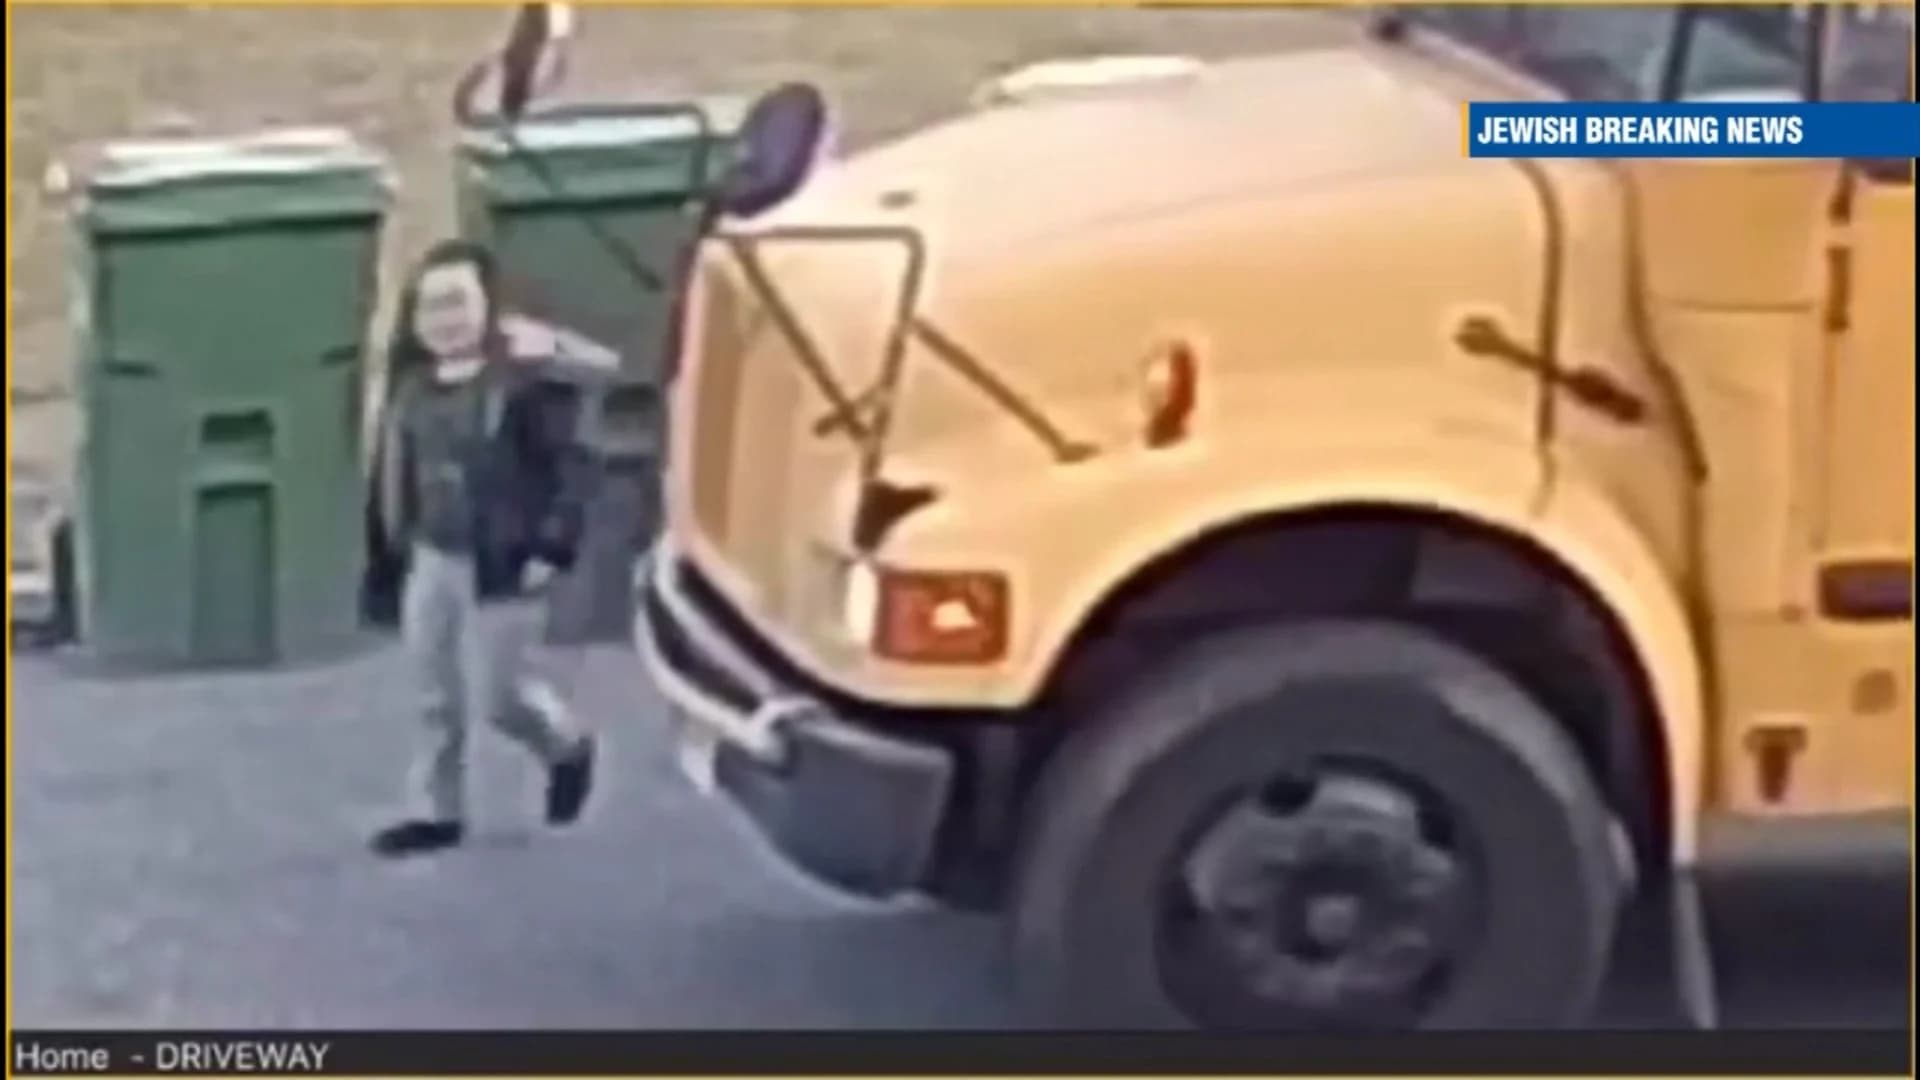 VIDEO: Student almost hit by bus that dropped him off; bus did not have safety arm